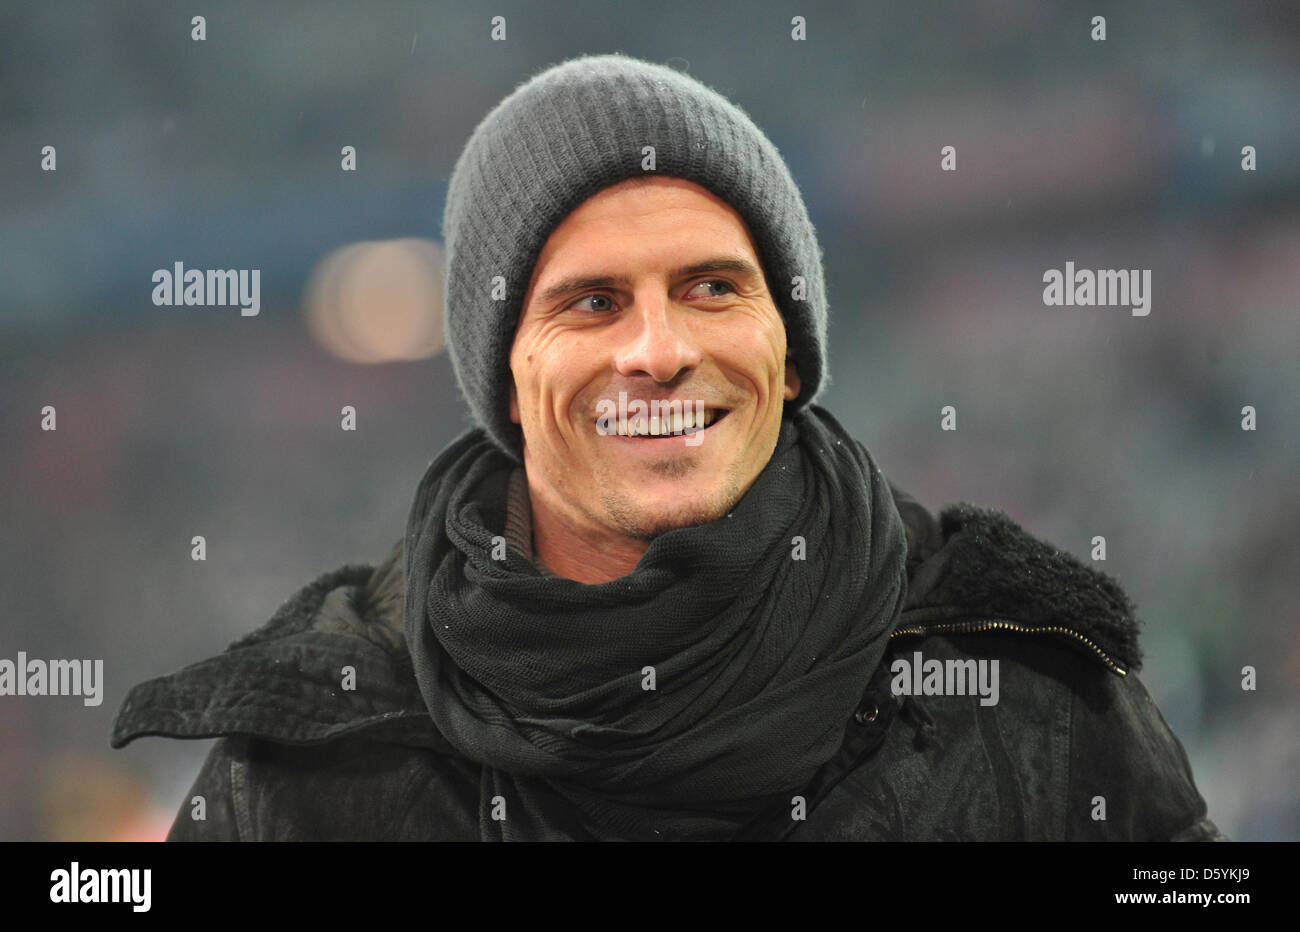 Bayern's Mario Gomez smiles prior to the German Bundesliga soccer match FC Bayern Munich vs Bayer 04 Leverkusen at Allianz Arena in Munich, Germany, 28 October 2012. The match ended 1:2. Photo: Andreas Gebert Stock Photo